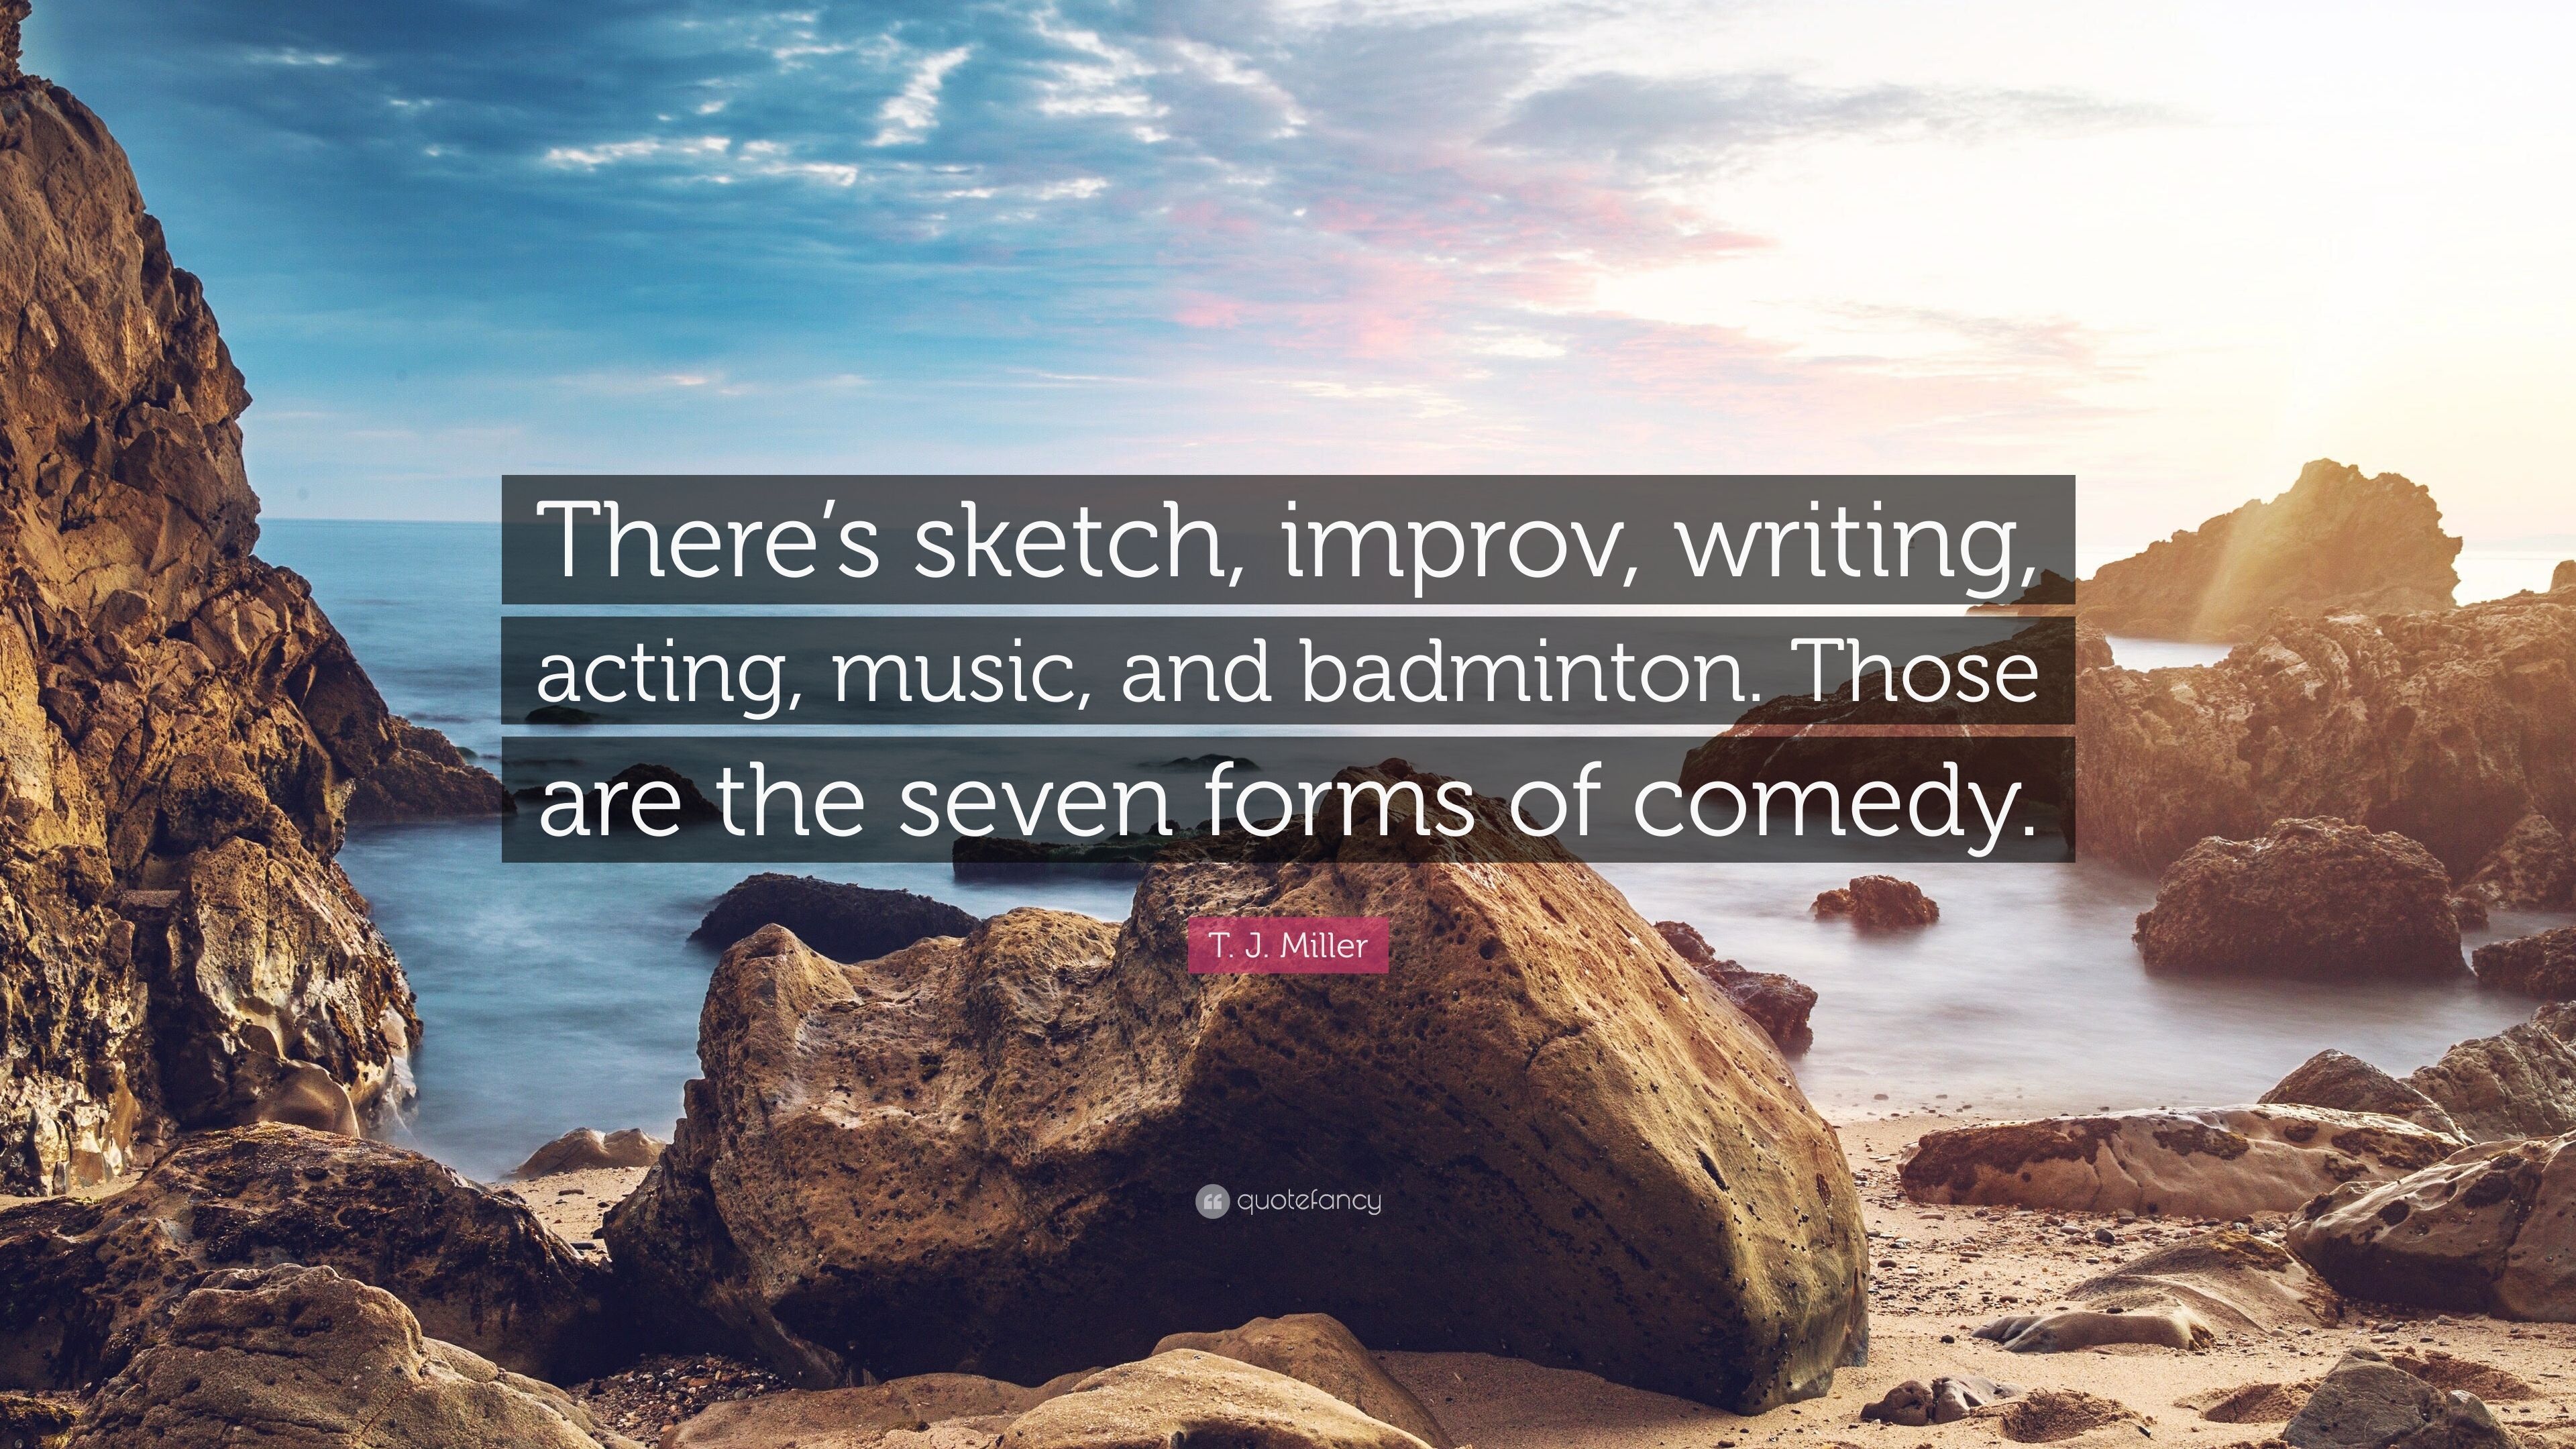 T. J. Miller Quote: “There's sketch, improv, writing, acting